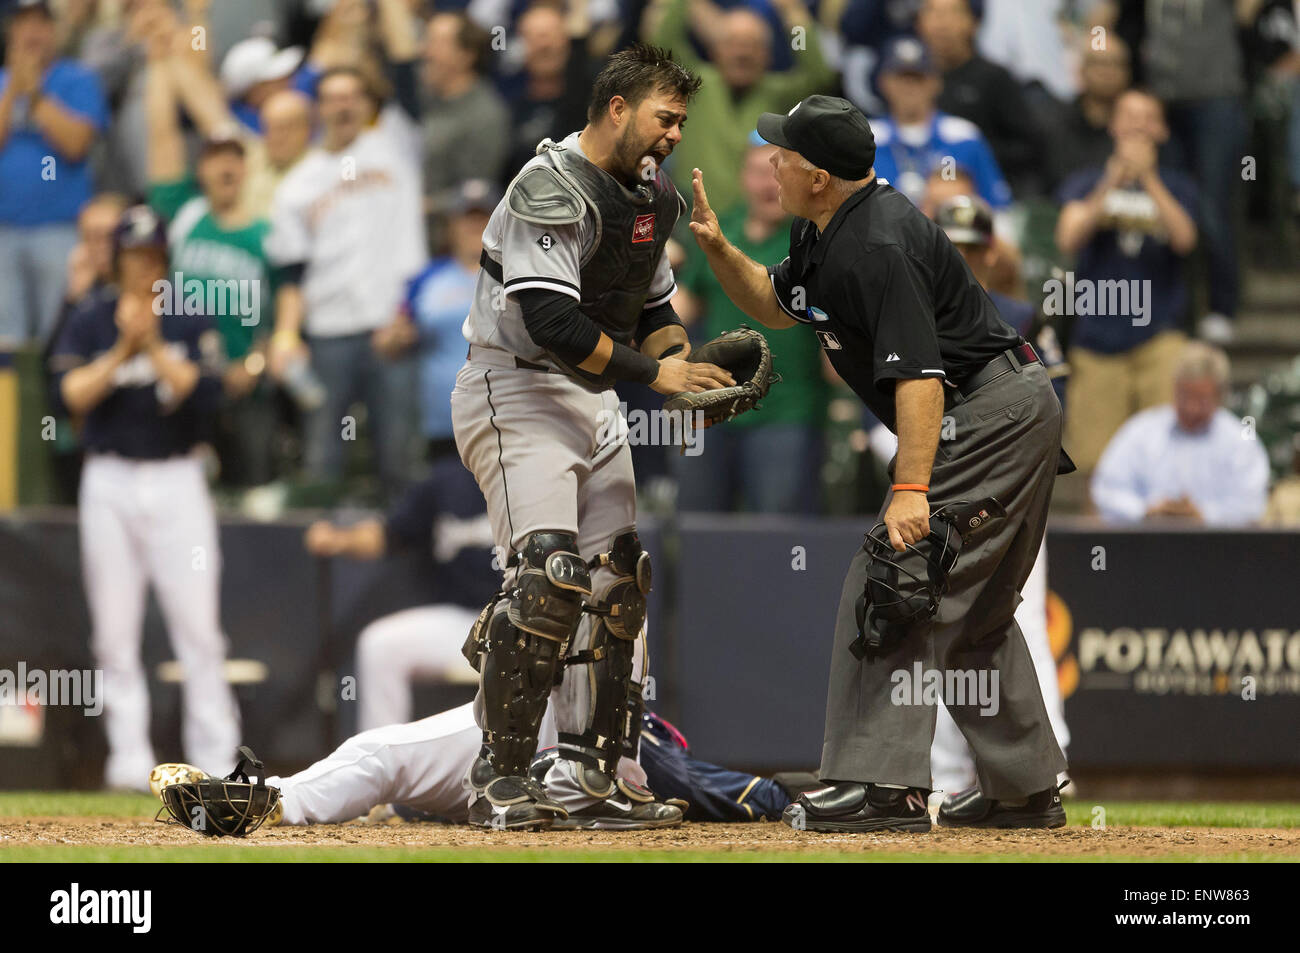 Milwaukee, WI, USA. 11th May, 2015. Chicago White Sox catcher Geovany Soto #58 argues the call by home plate umpire Brian O'Nora during the Major League Baseball game between the Milwaukee Brewers and the Chicago White Sox at Miller Park in Milwaukee, WI. John Fisher/CSM/Alamy Live News Stock Photo